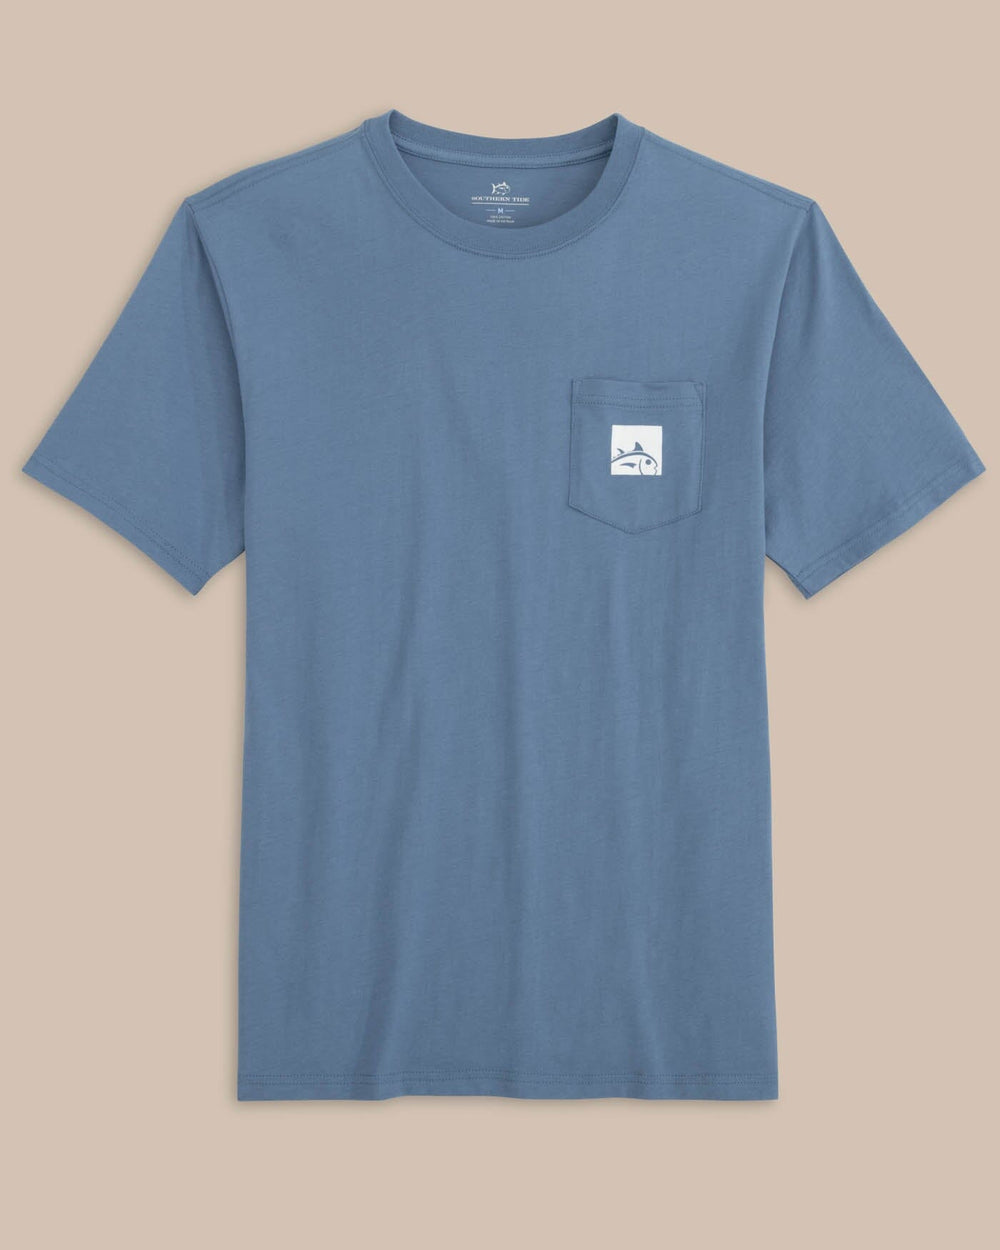 The front view of the Southern Tide Cropped Skipjack Box Short Sleeve T-Shirt by Southern Tide - Coronet Blue